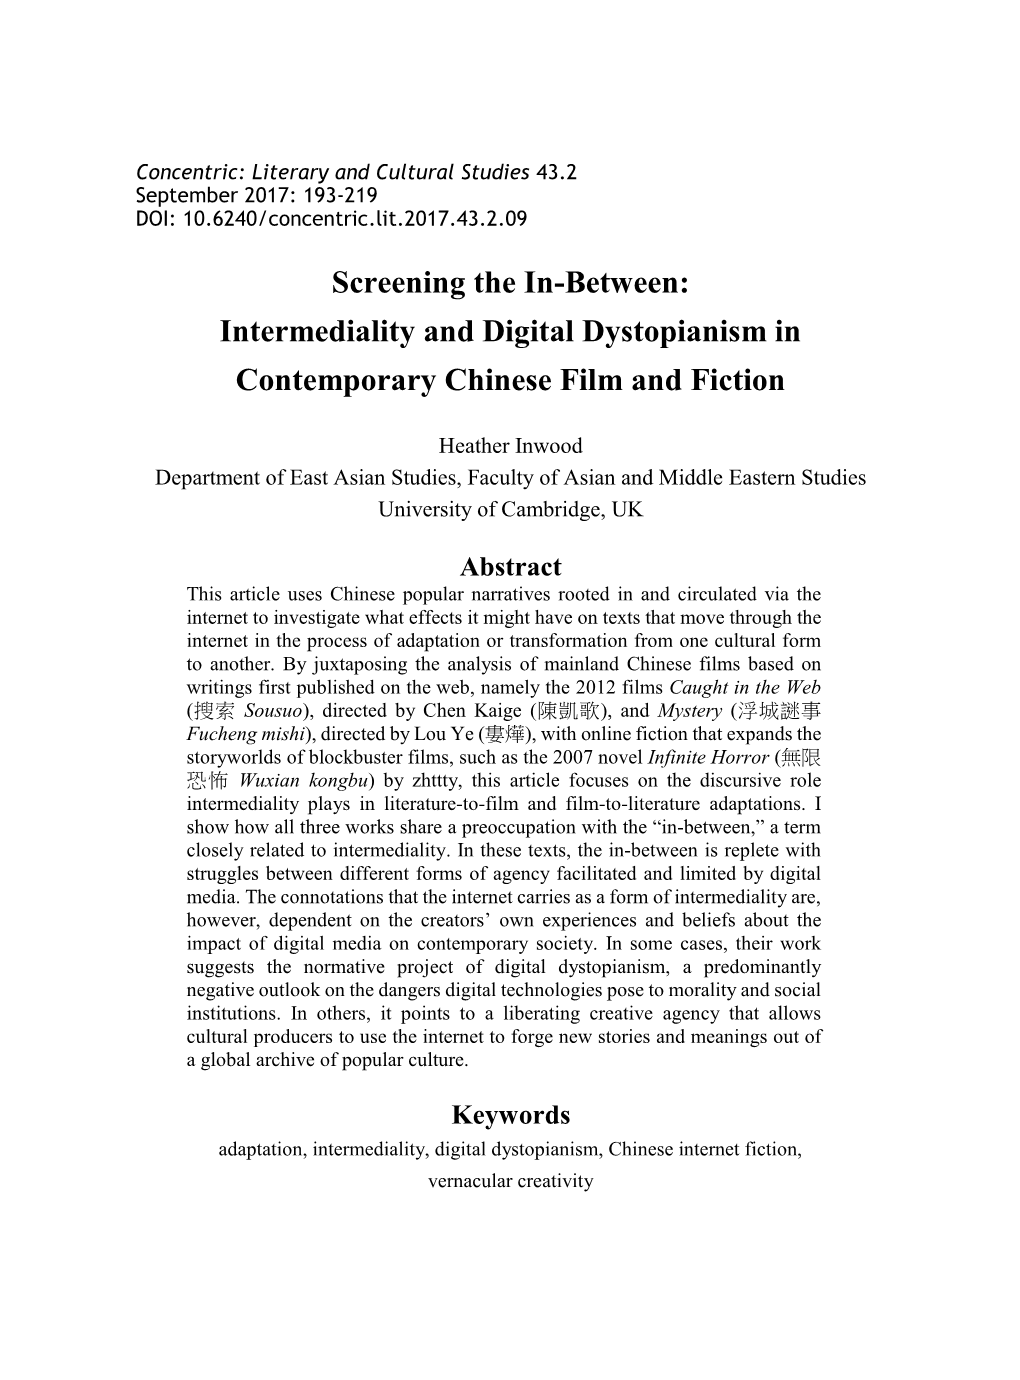 Intermediality and Digital Dystopianism in Contemporary Chinese Film and Fiction